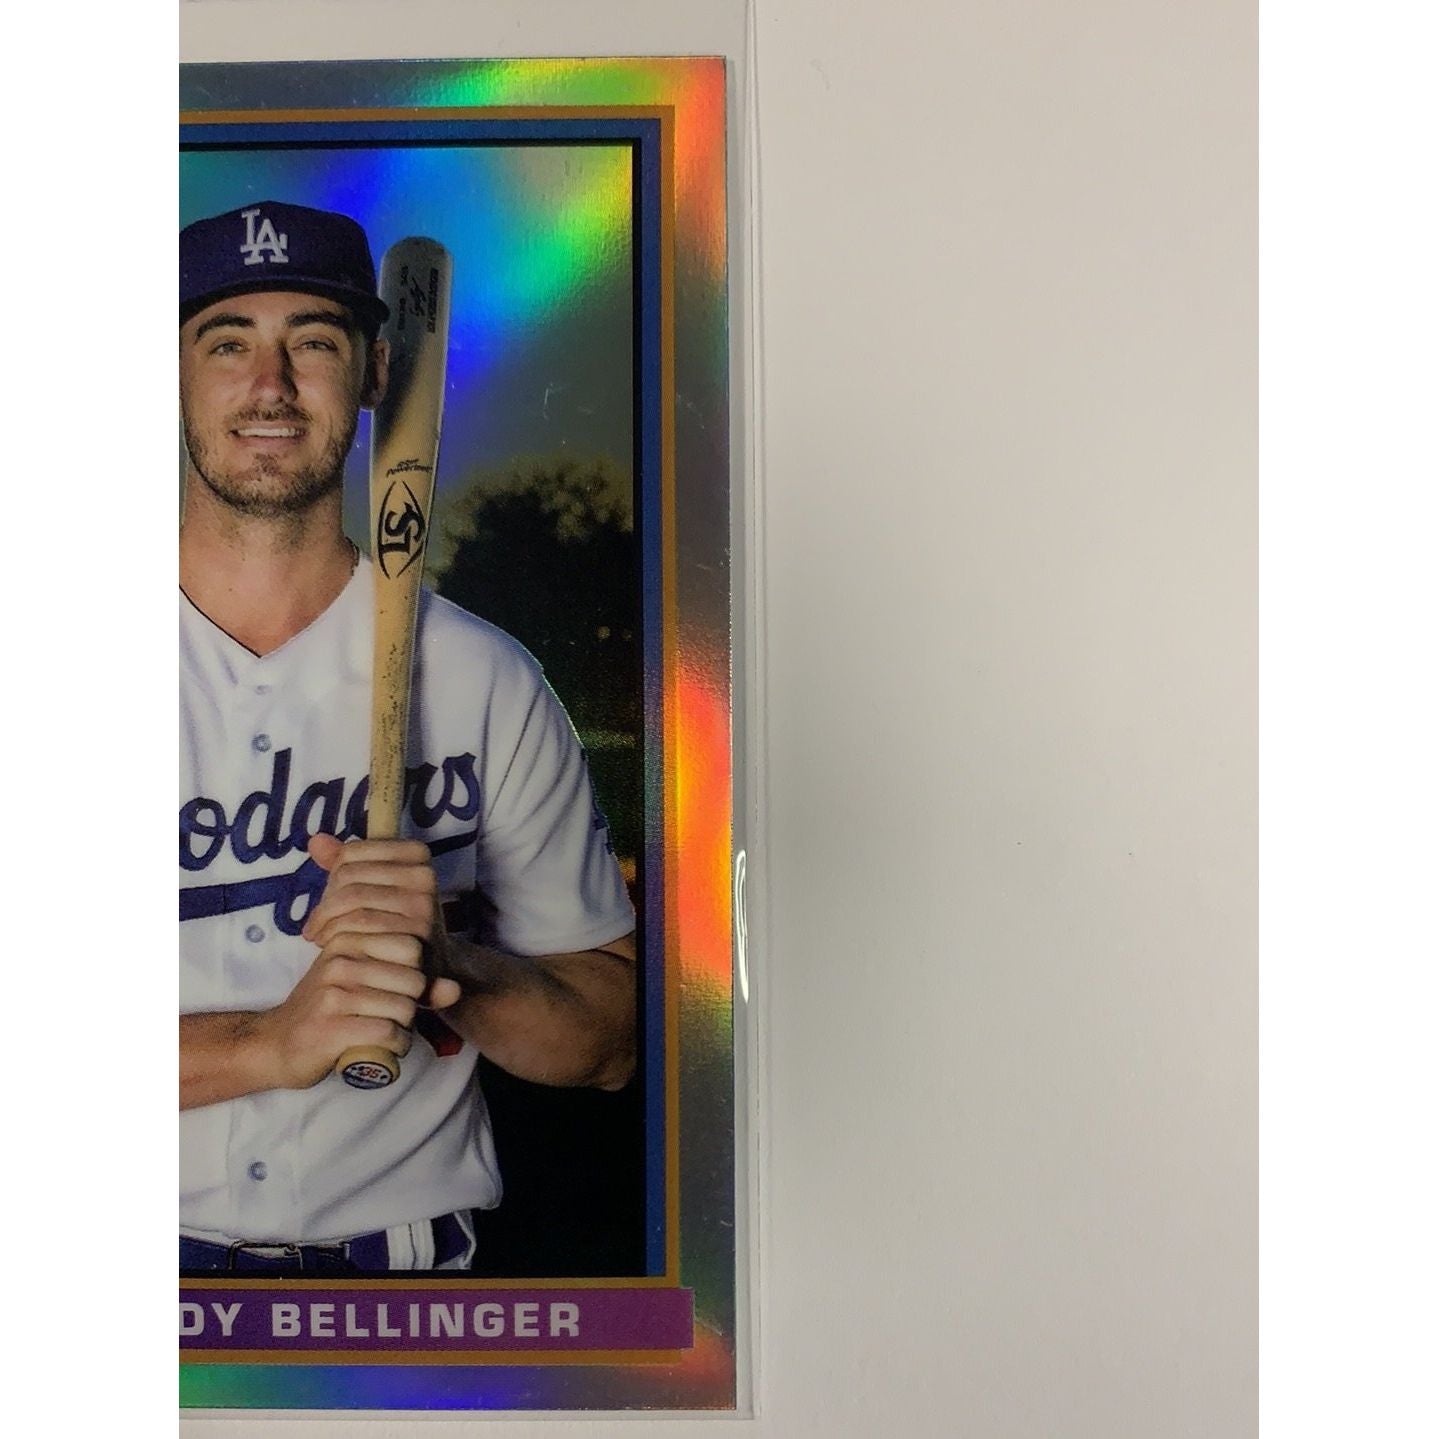  2021 Bowman Chrome Cody Bellinger 91’ Refractor  Local Legends Cards & Collectibles